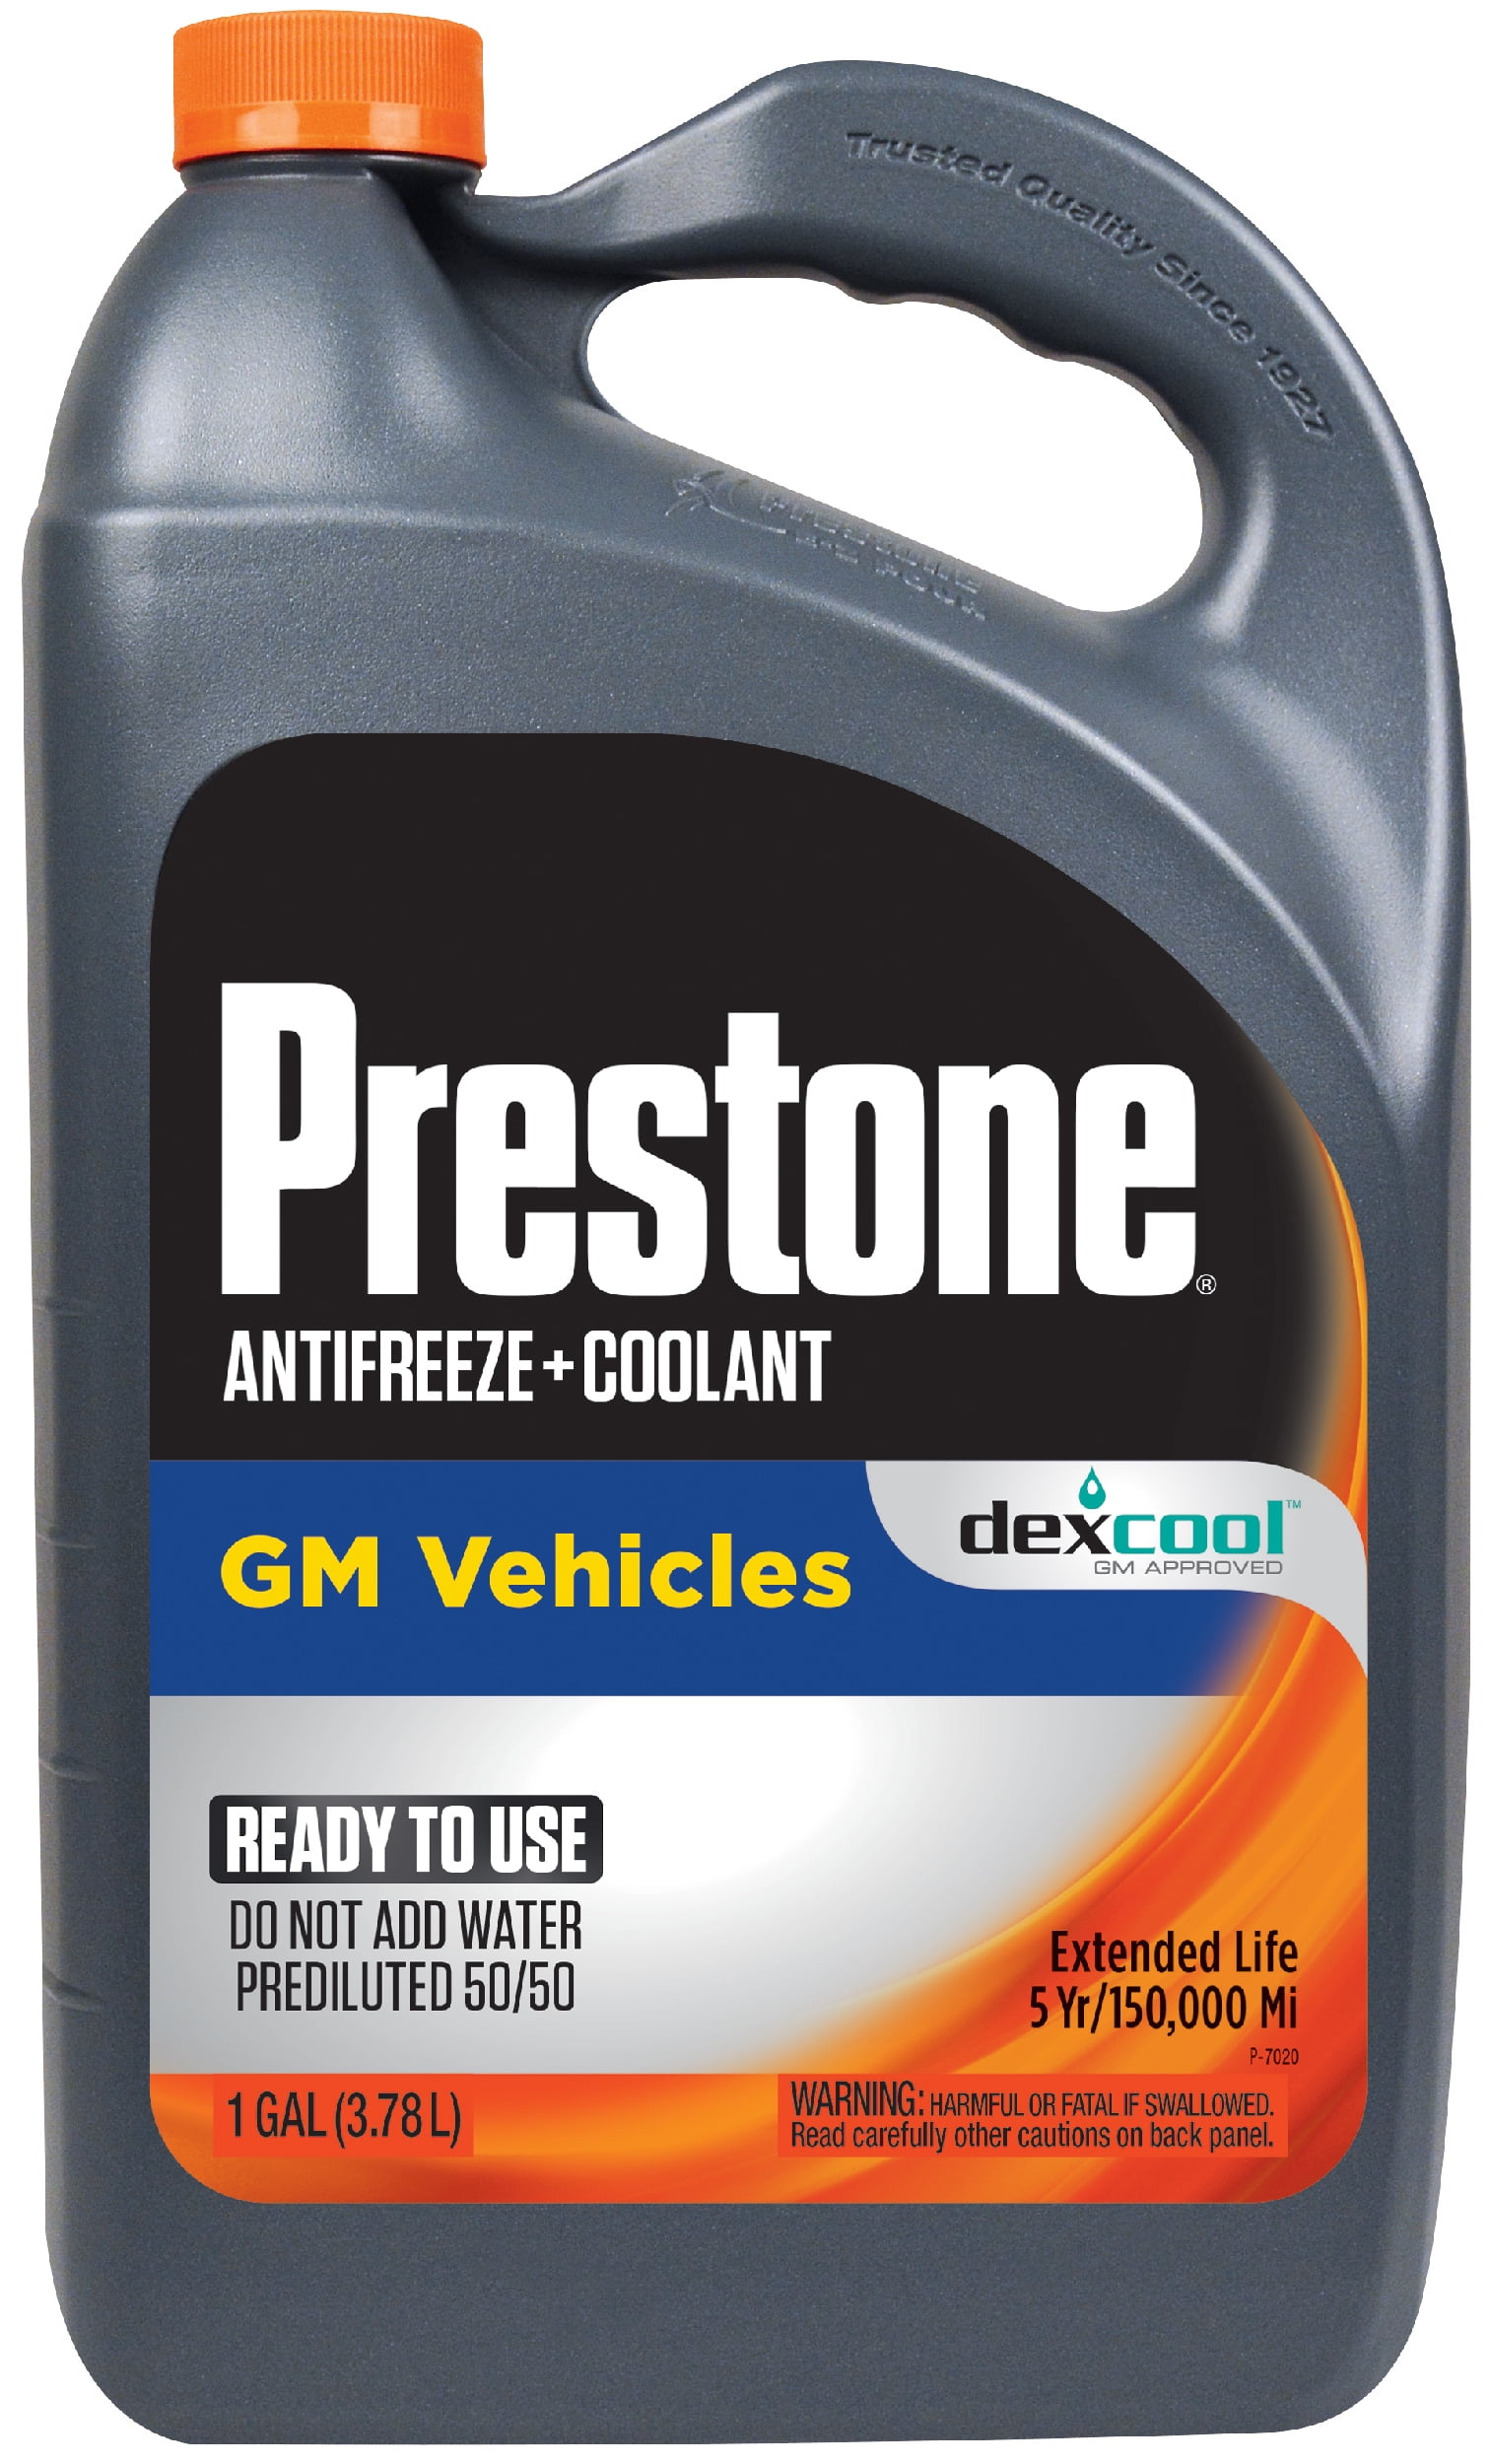 Prestone DEX-COOL Antifreeze+Coolant; Extended Life -1 Gal- Ready to Use, 50/50